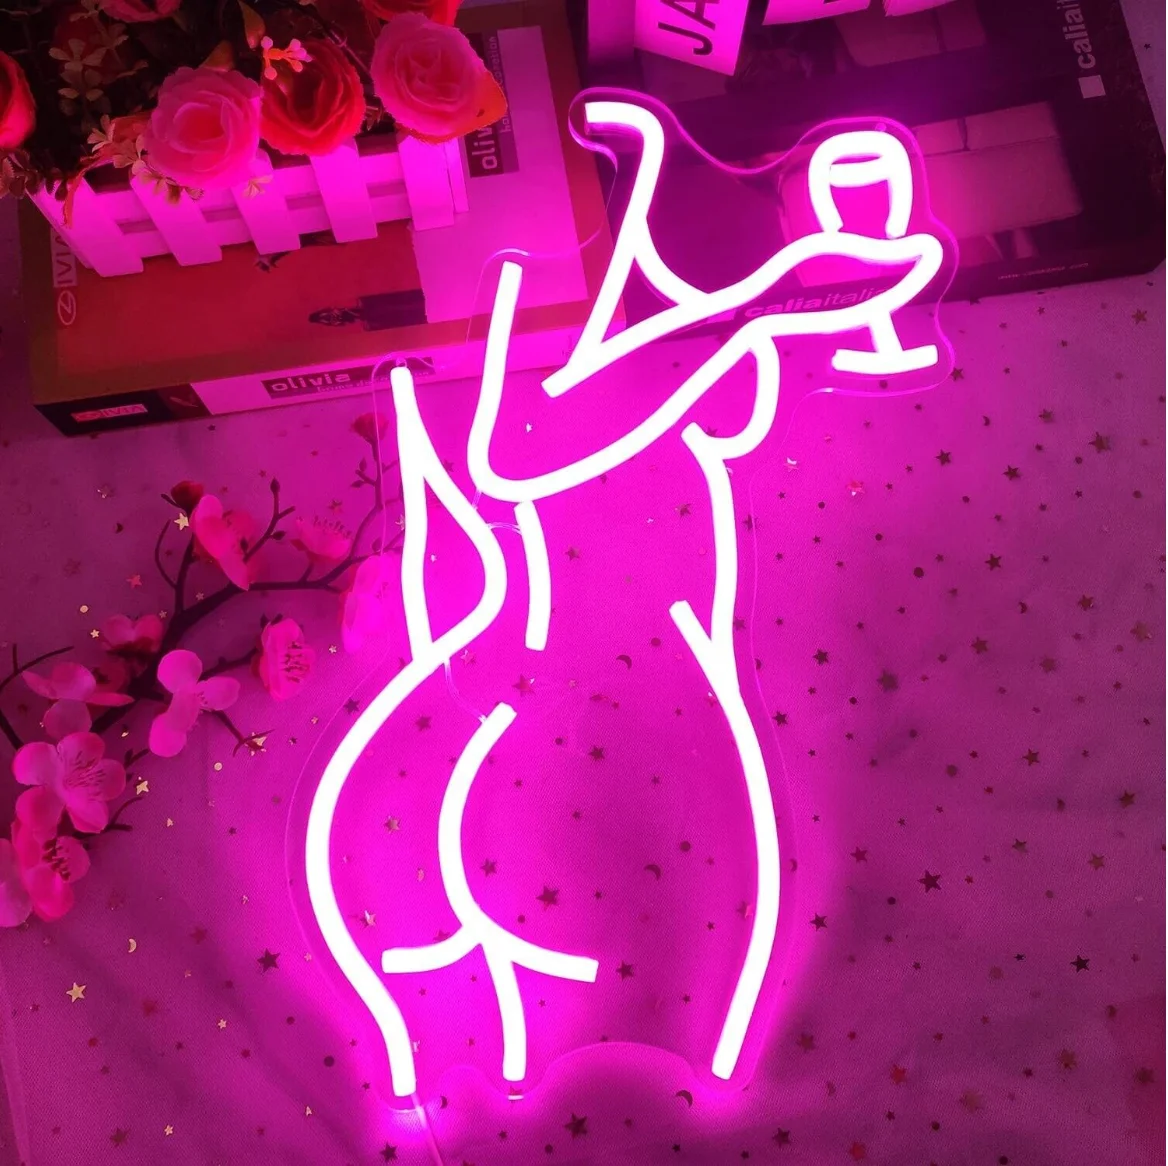 Ajoyferris Women's Back Neon Sign Adjustable LED Women's Neon Sign Neon Pink Sign Women's led neon sign large neon light logo led neon sign custom name neon for bed room bar salon coffee shop